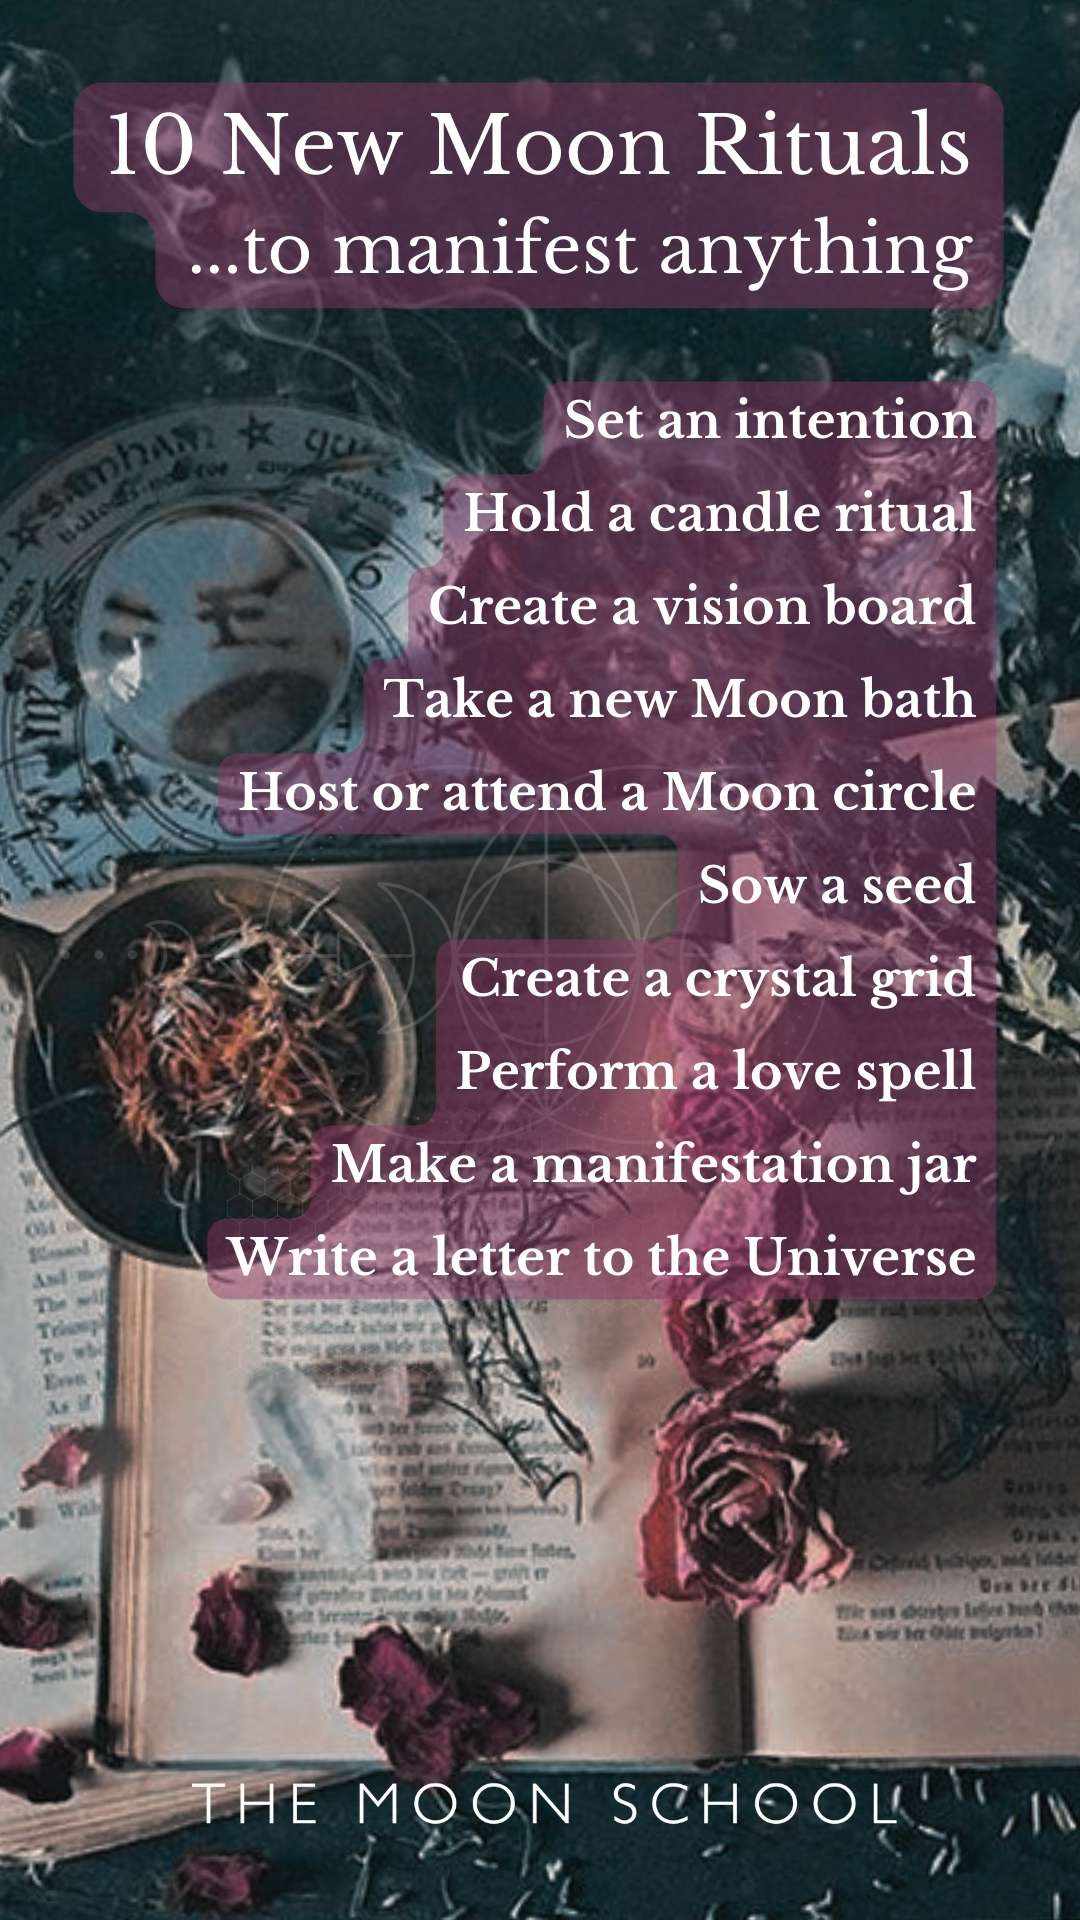 Lunar altar with list of new moon rituals